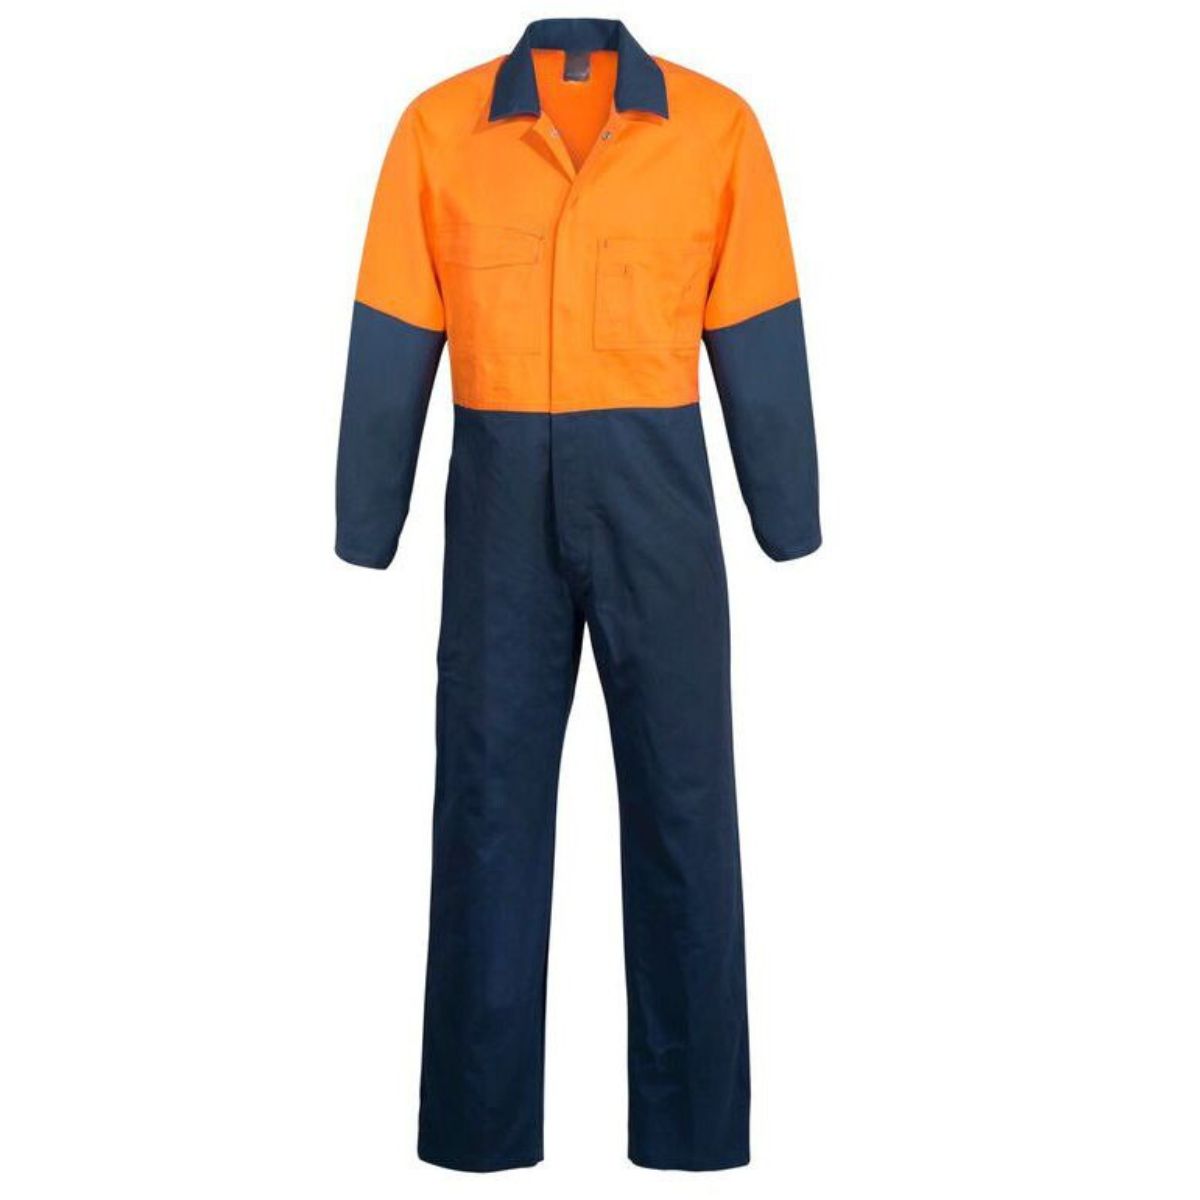 Tuffa Orange/Navy Cotton Drill Coveralls - South East Clearance Centre